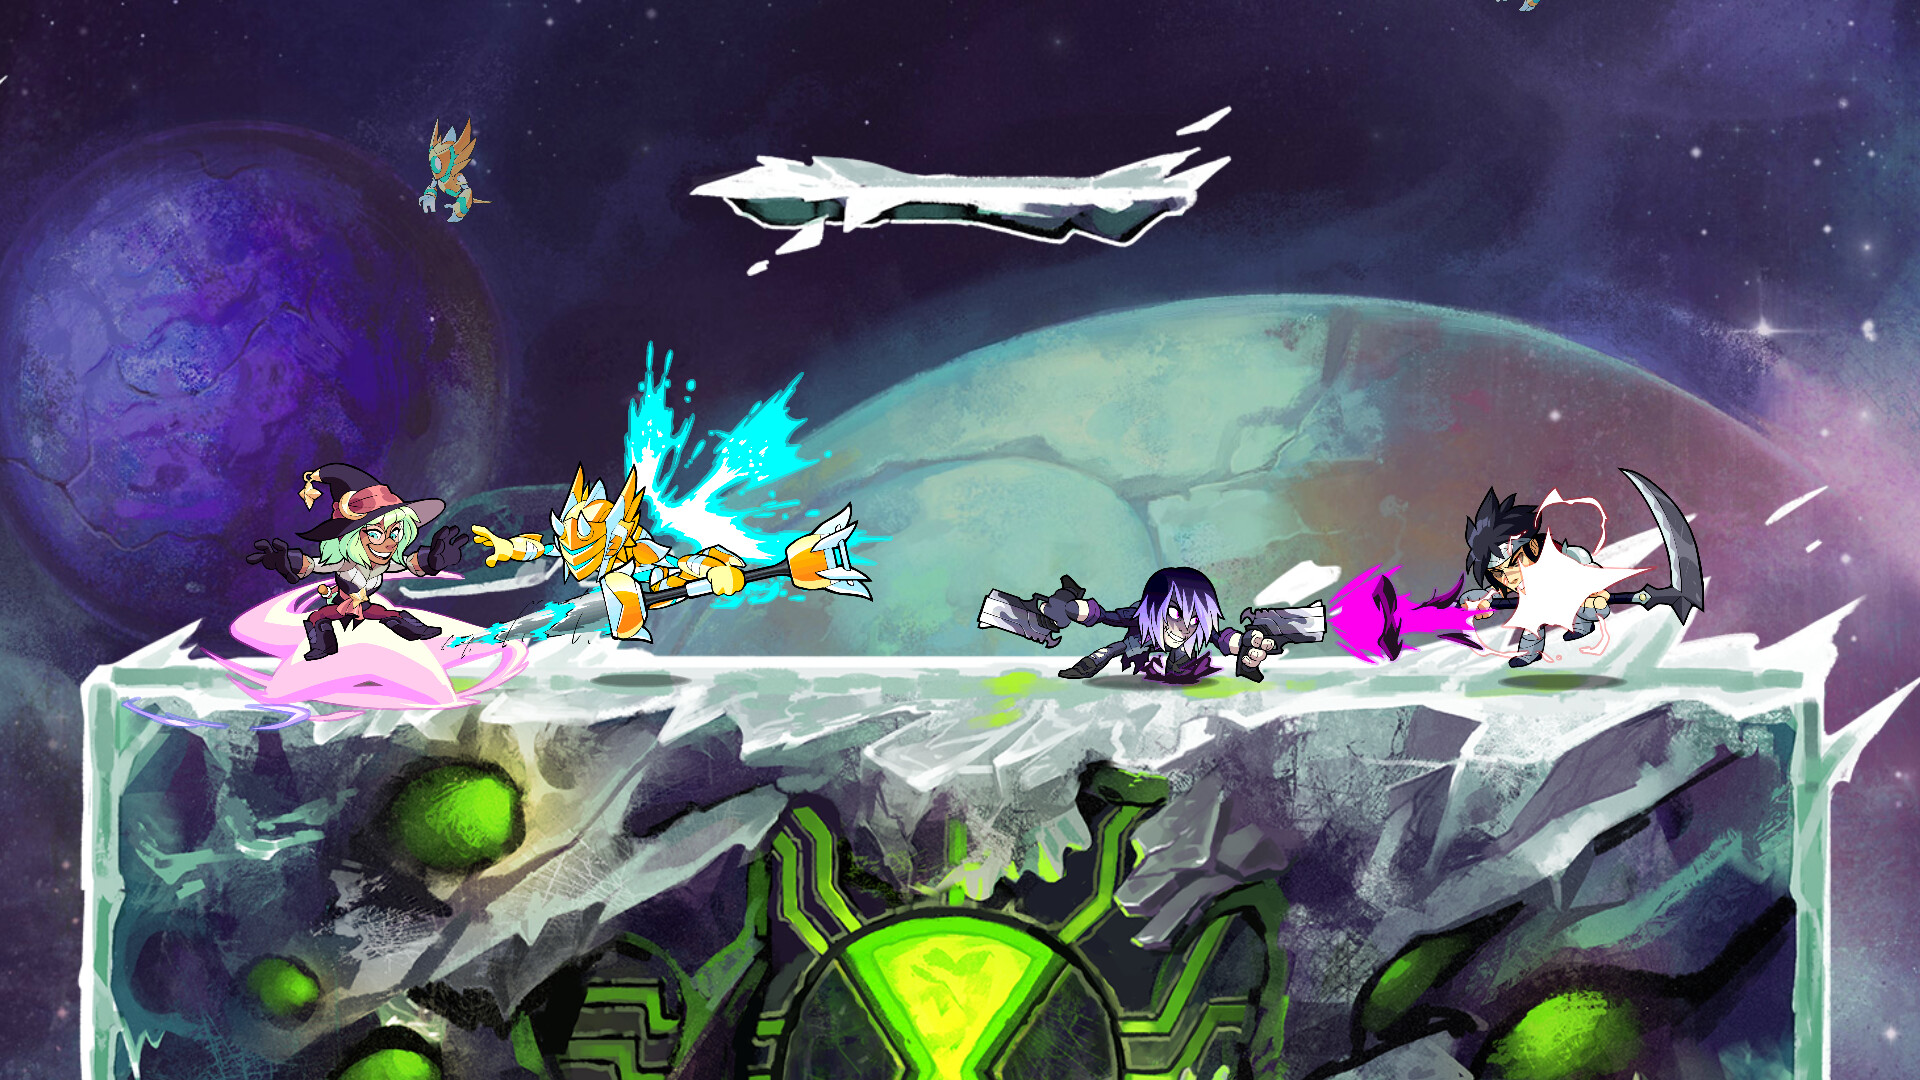 Brawlhalla - Collectors Pack Featured Screenshot #1